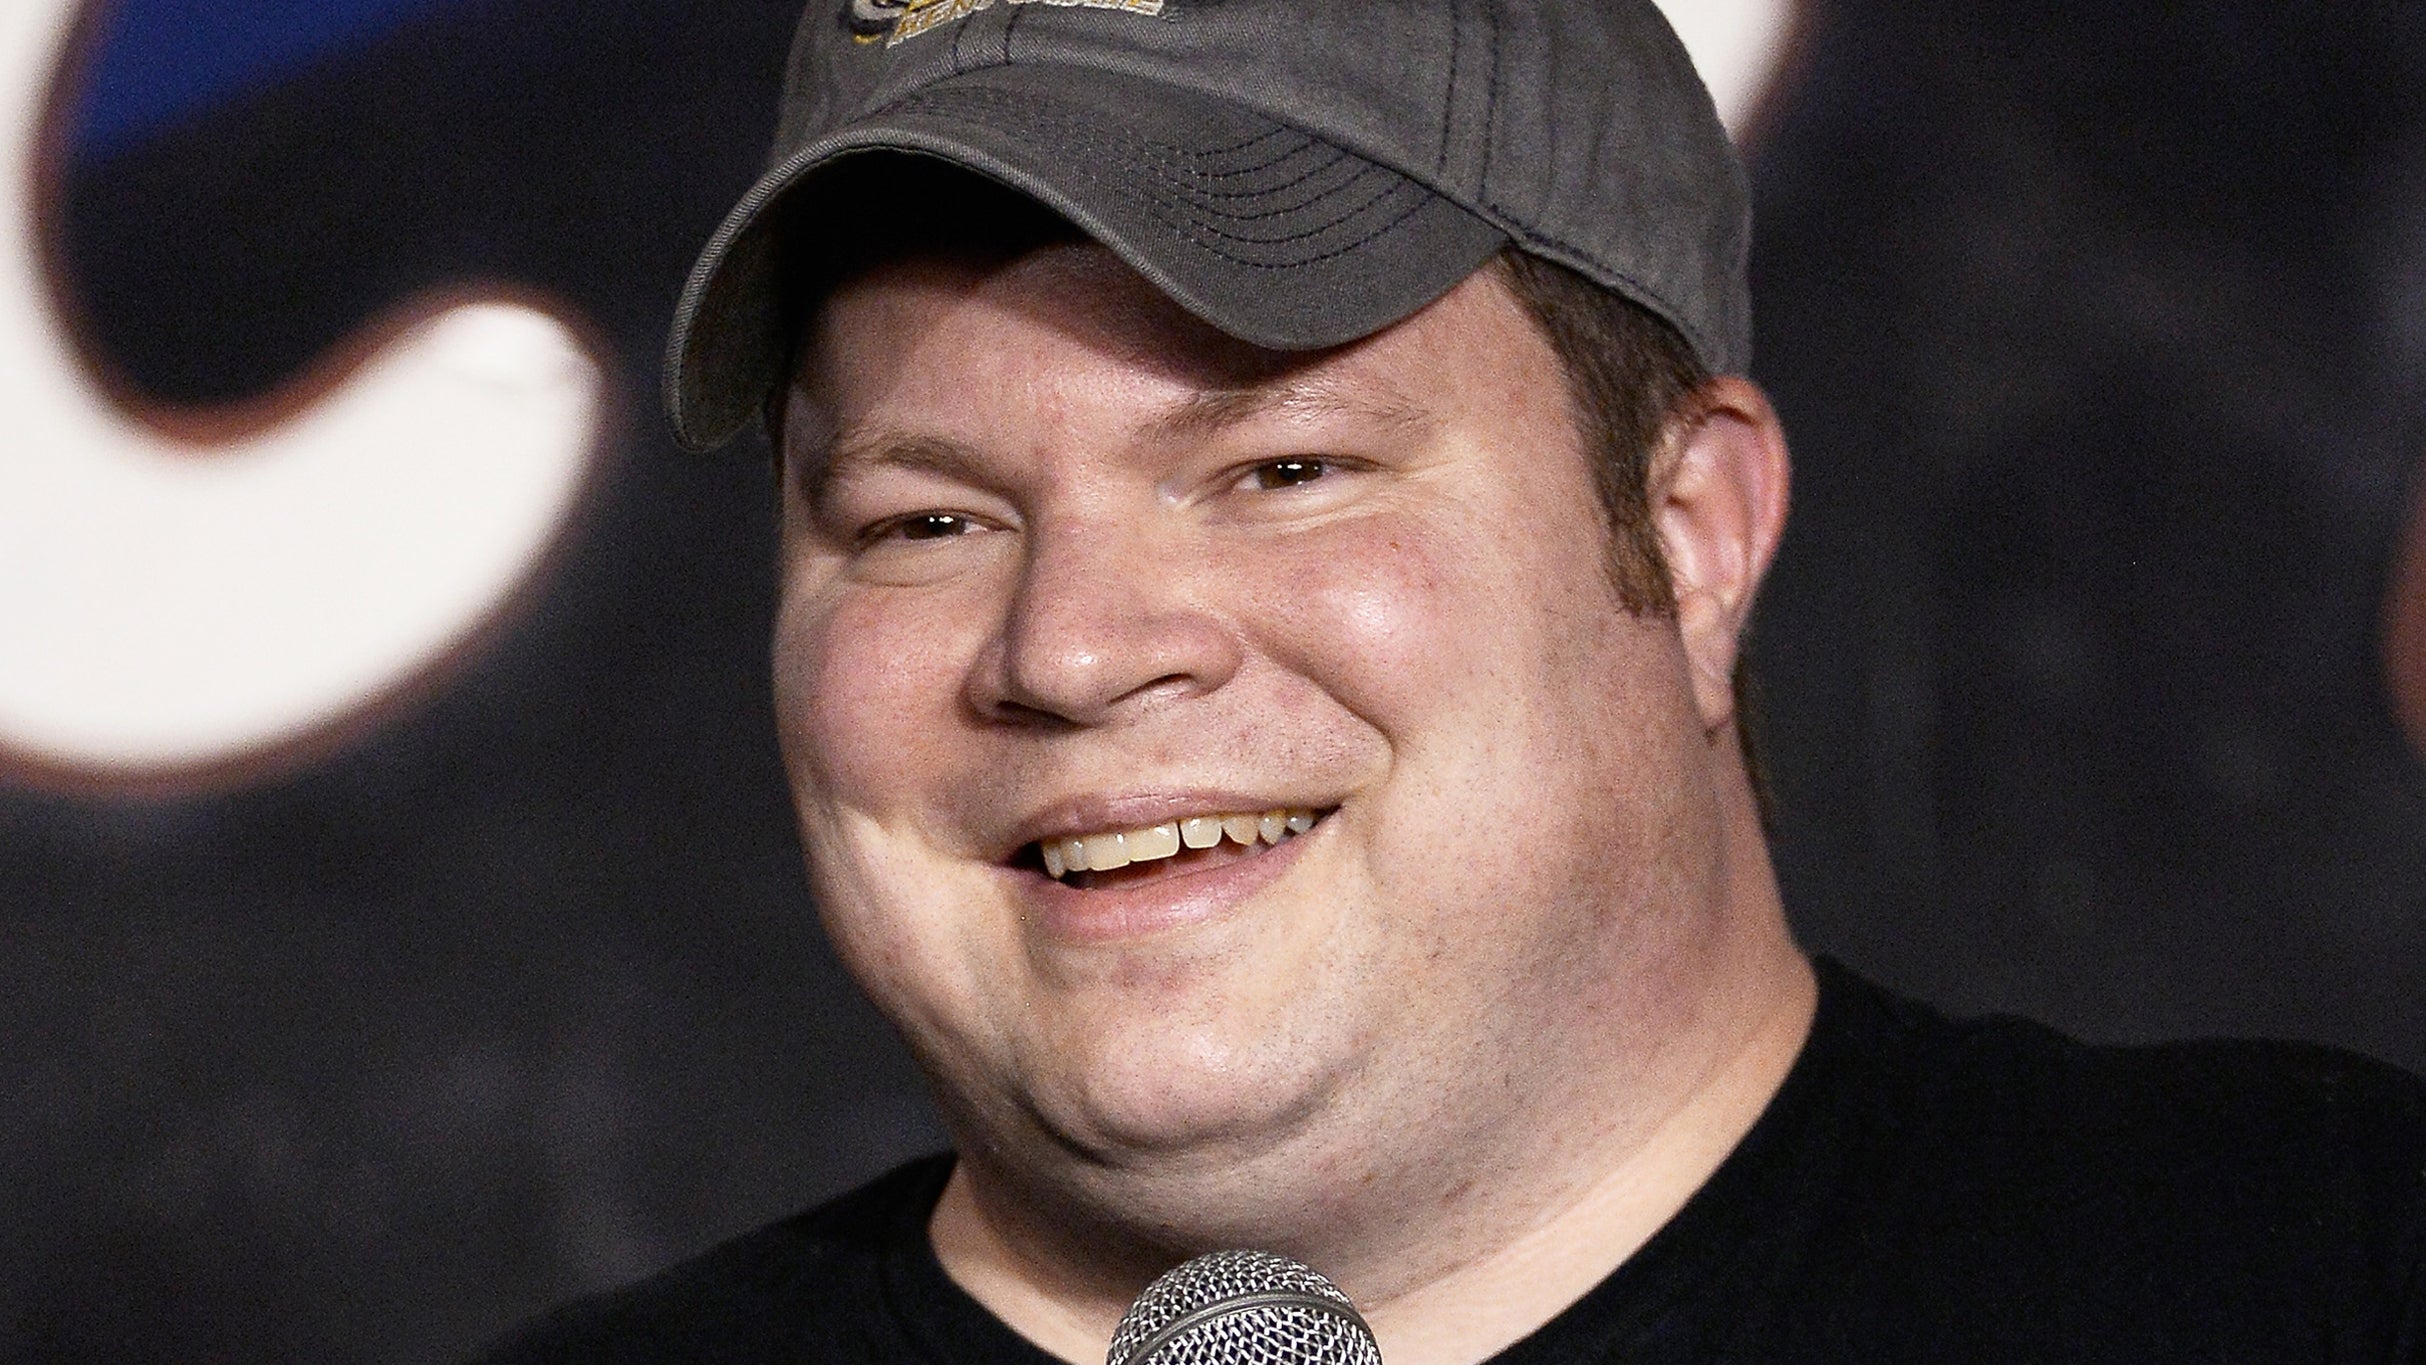 John Caparulo's Mad Cap Comedy with Rocky Dale Davis in Knoxville promo photo for Venue presale offer code